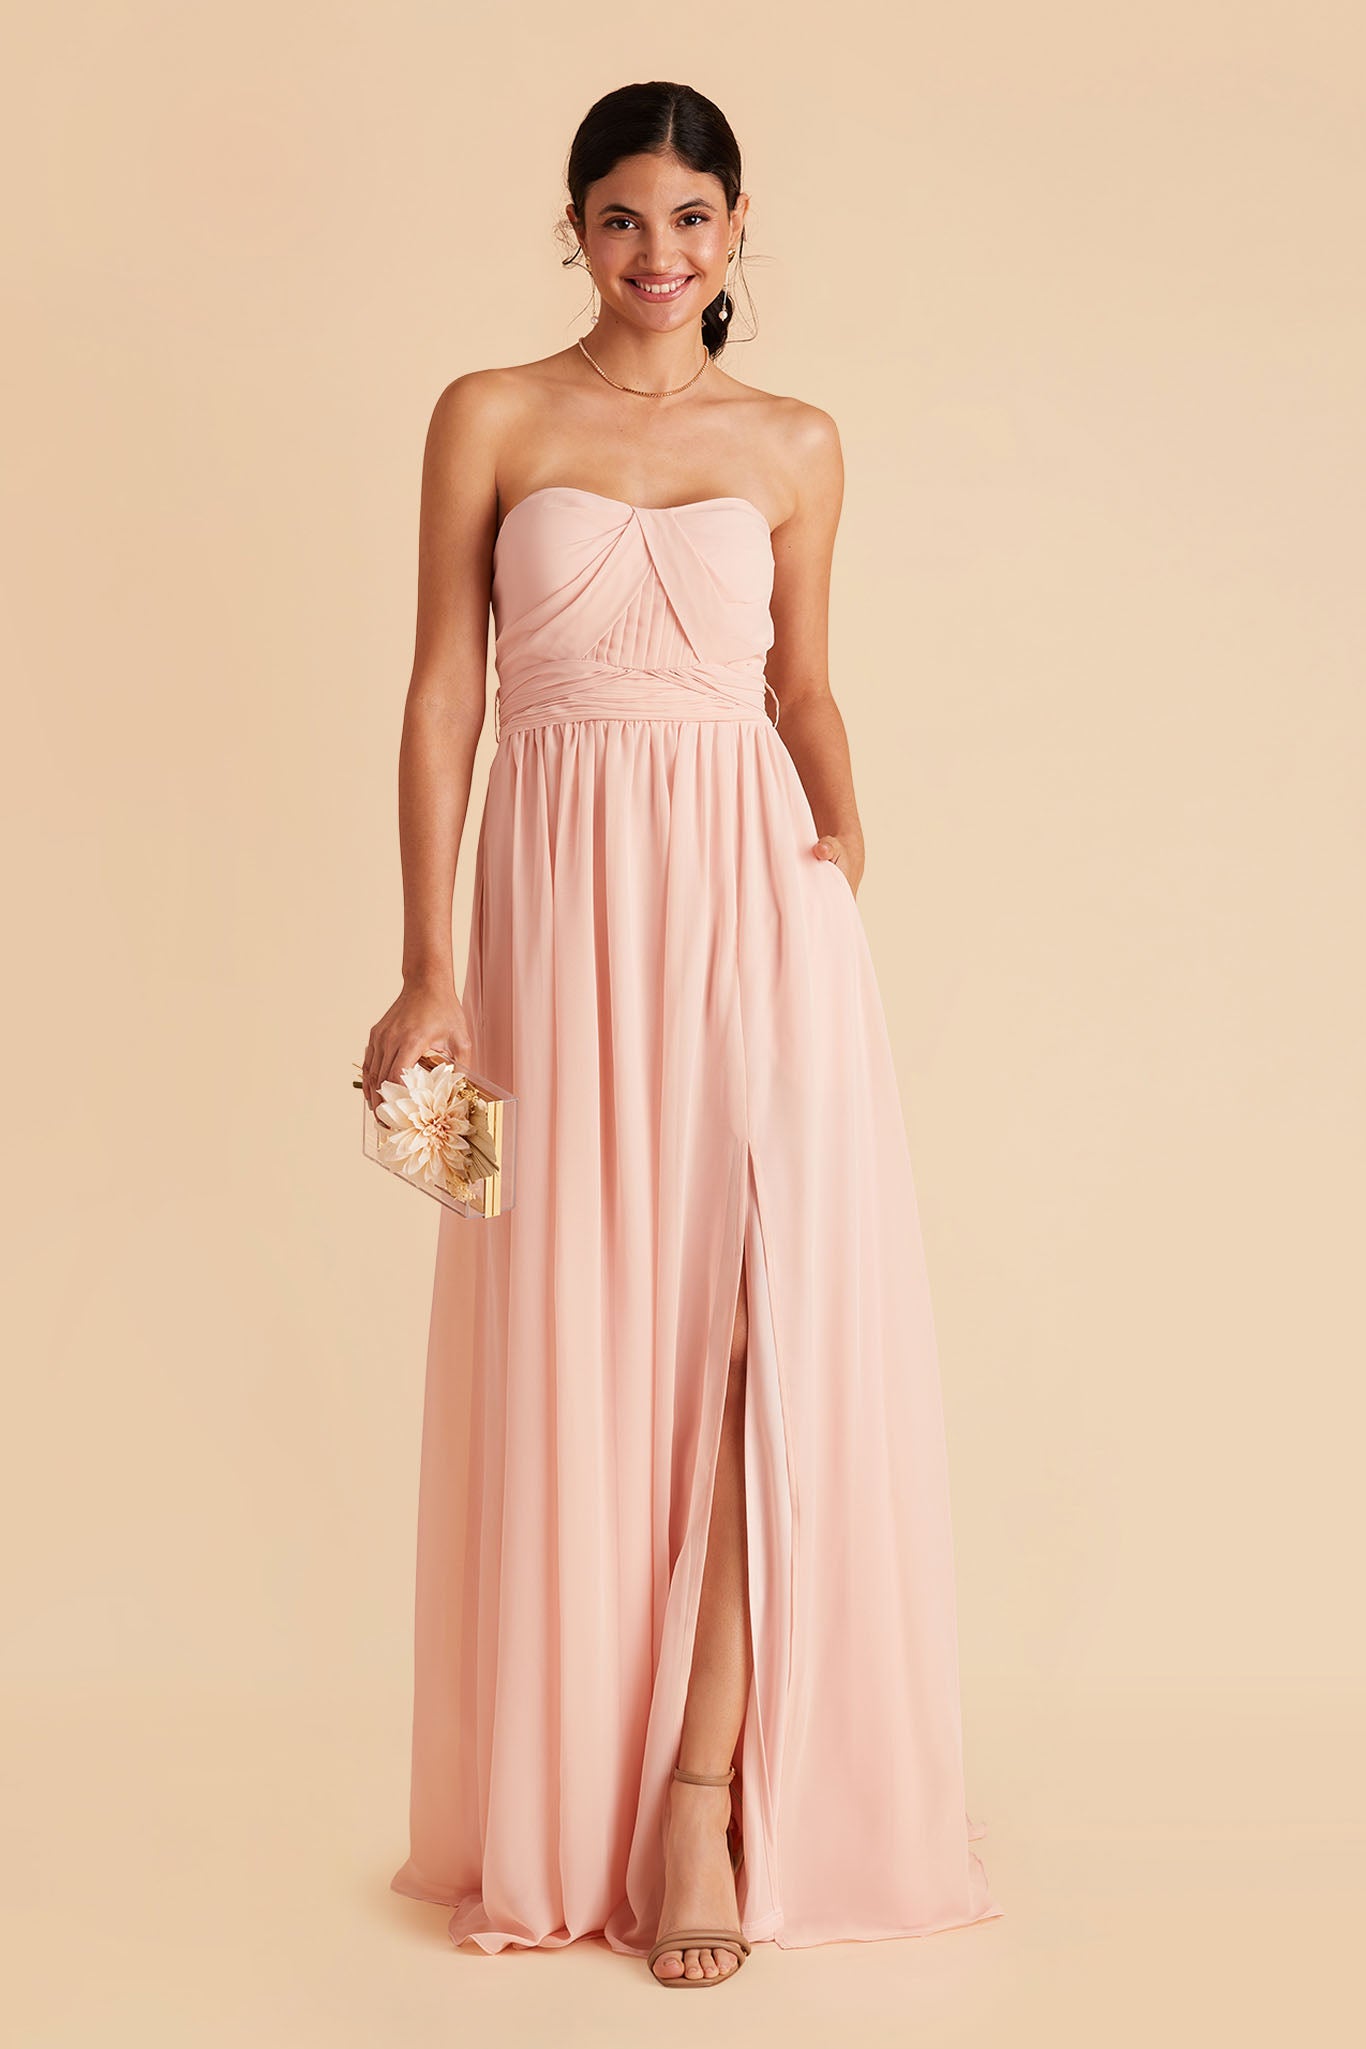 Grace convertible bridesmaid dress in Blush Pink Chiffon by Birdy Grey, front view